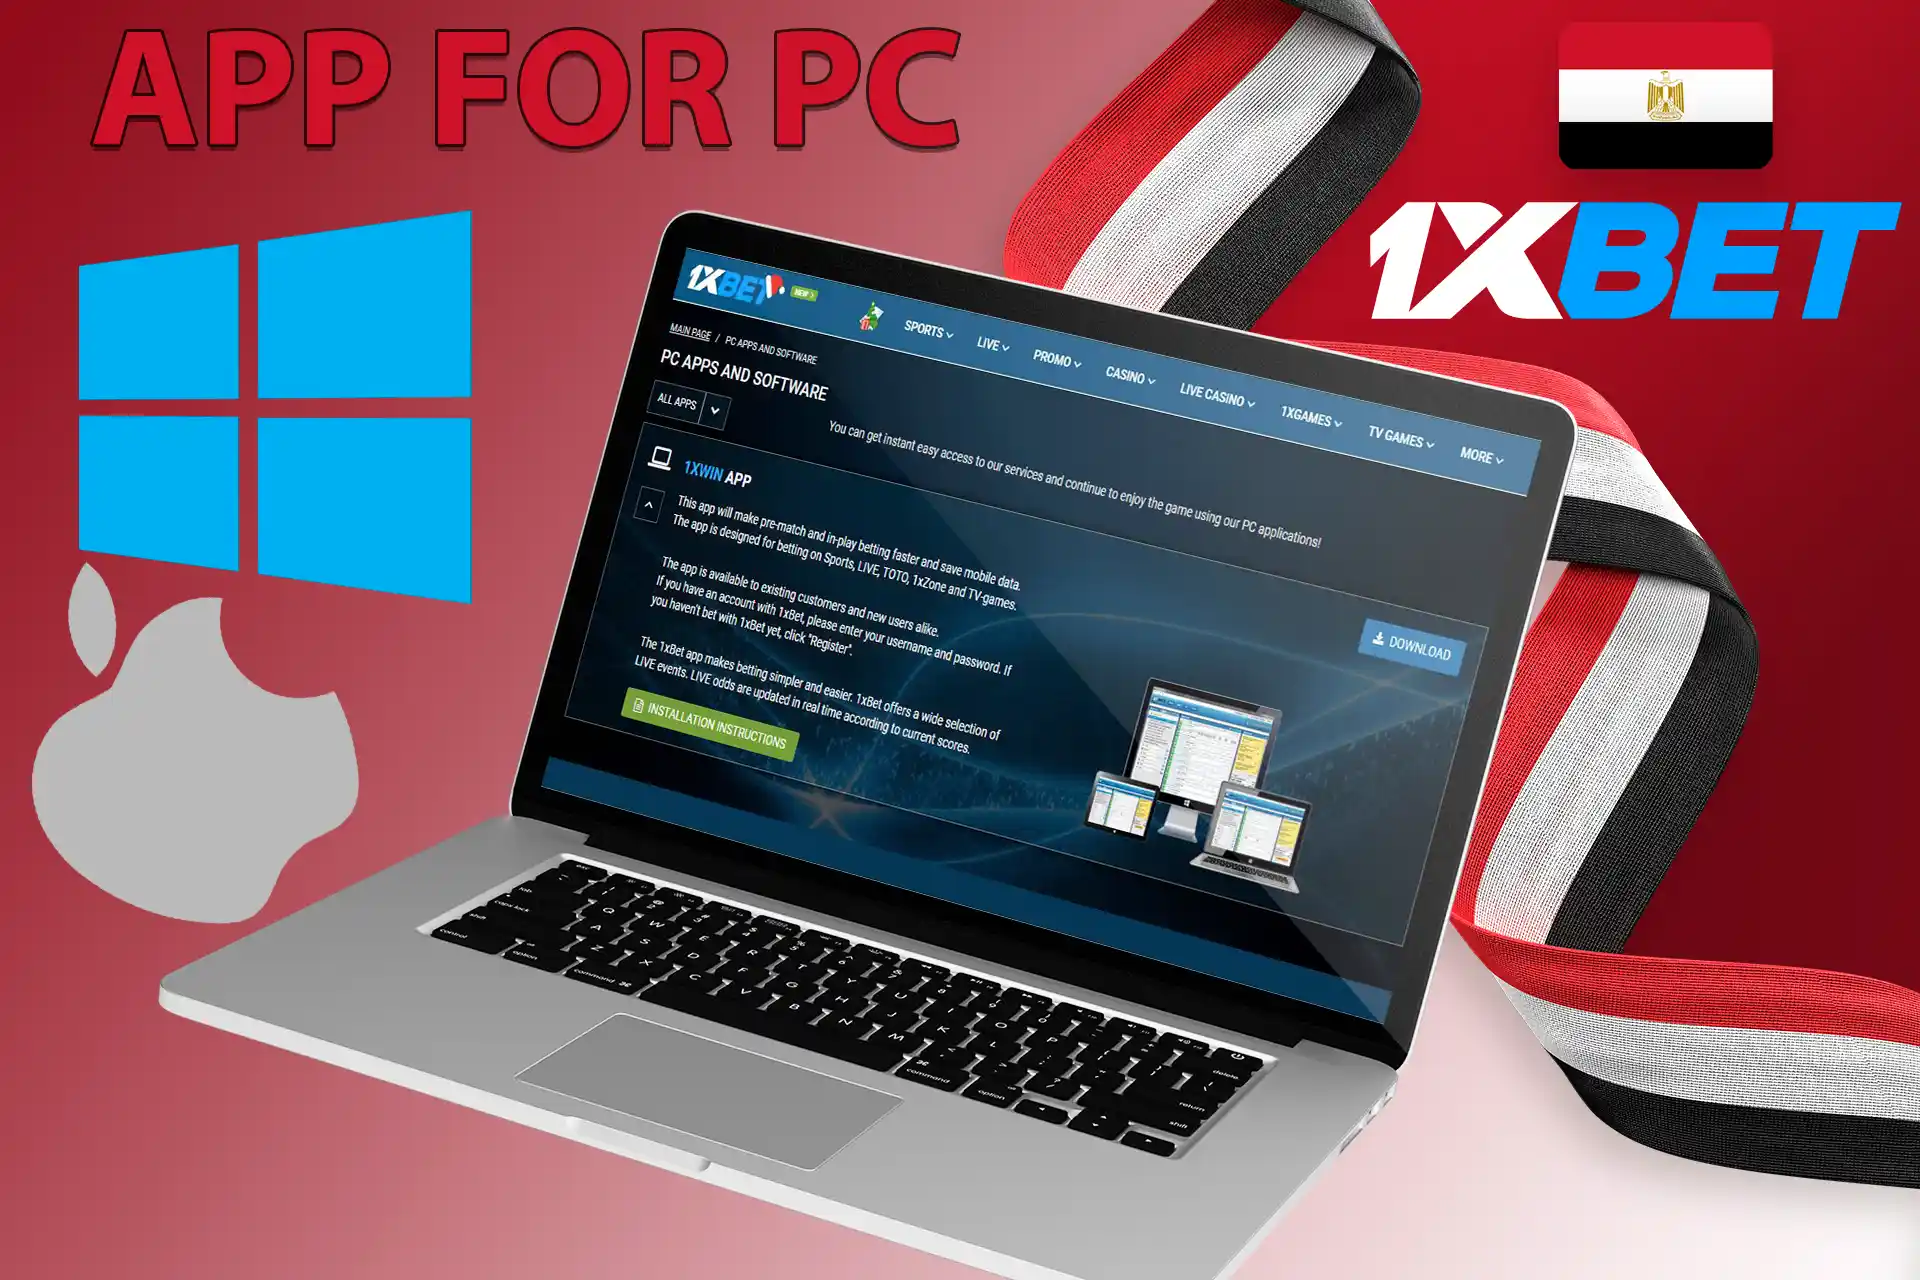 Download the application on your PC